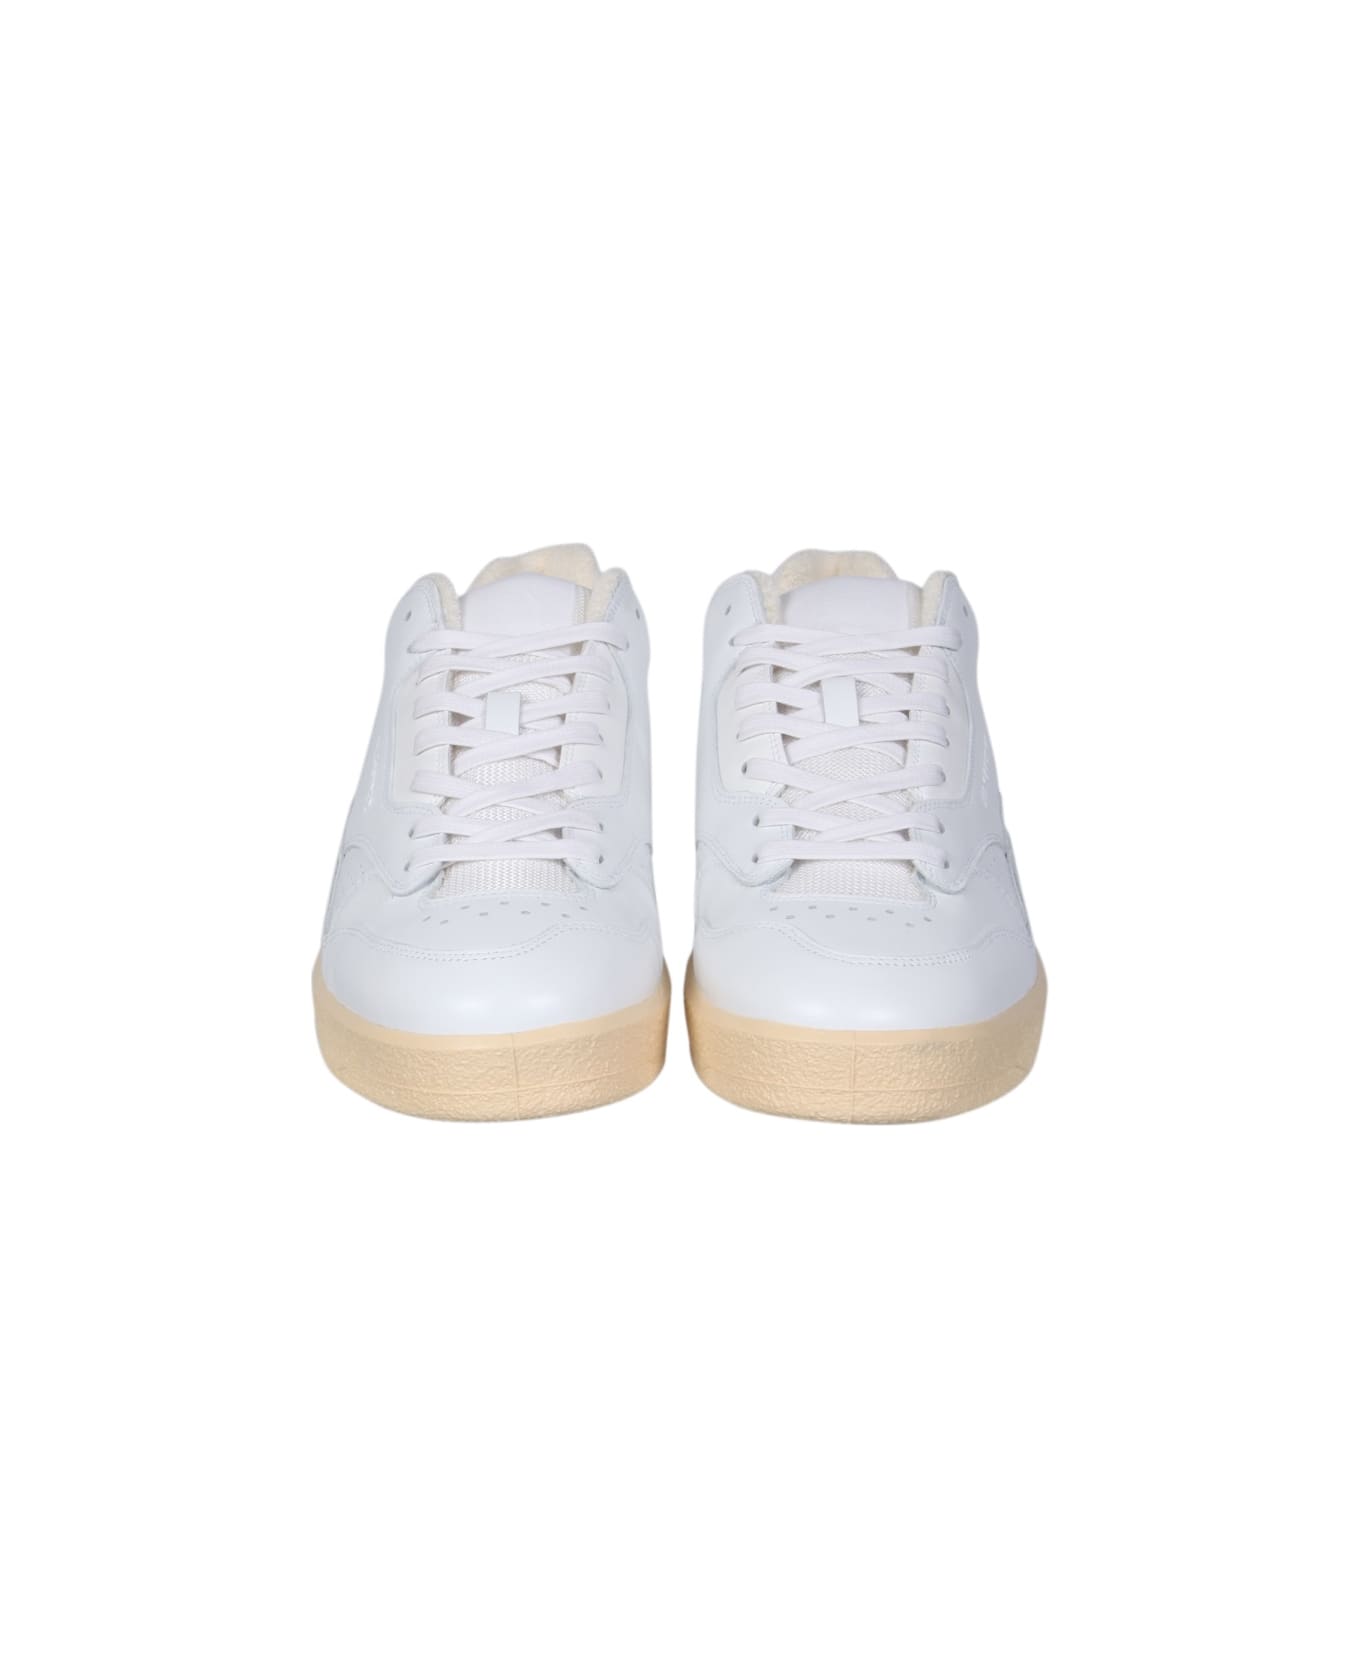 Jil Sander Low Leather Sneakers - WHITE スニーカー